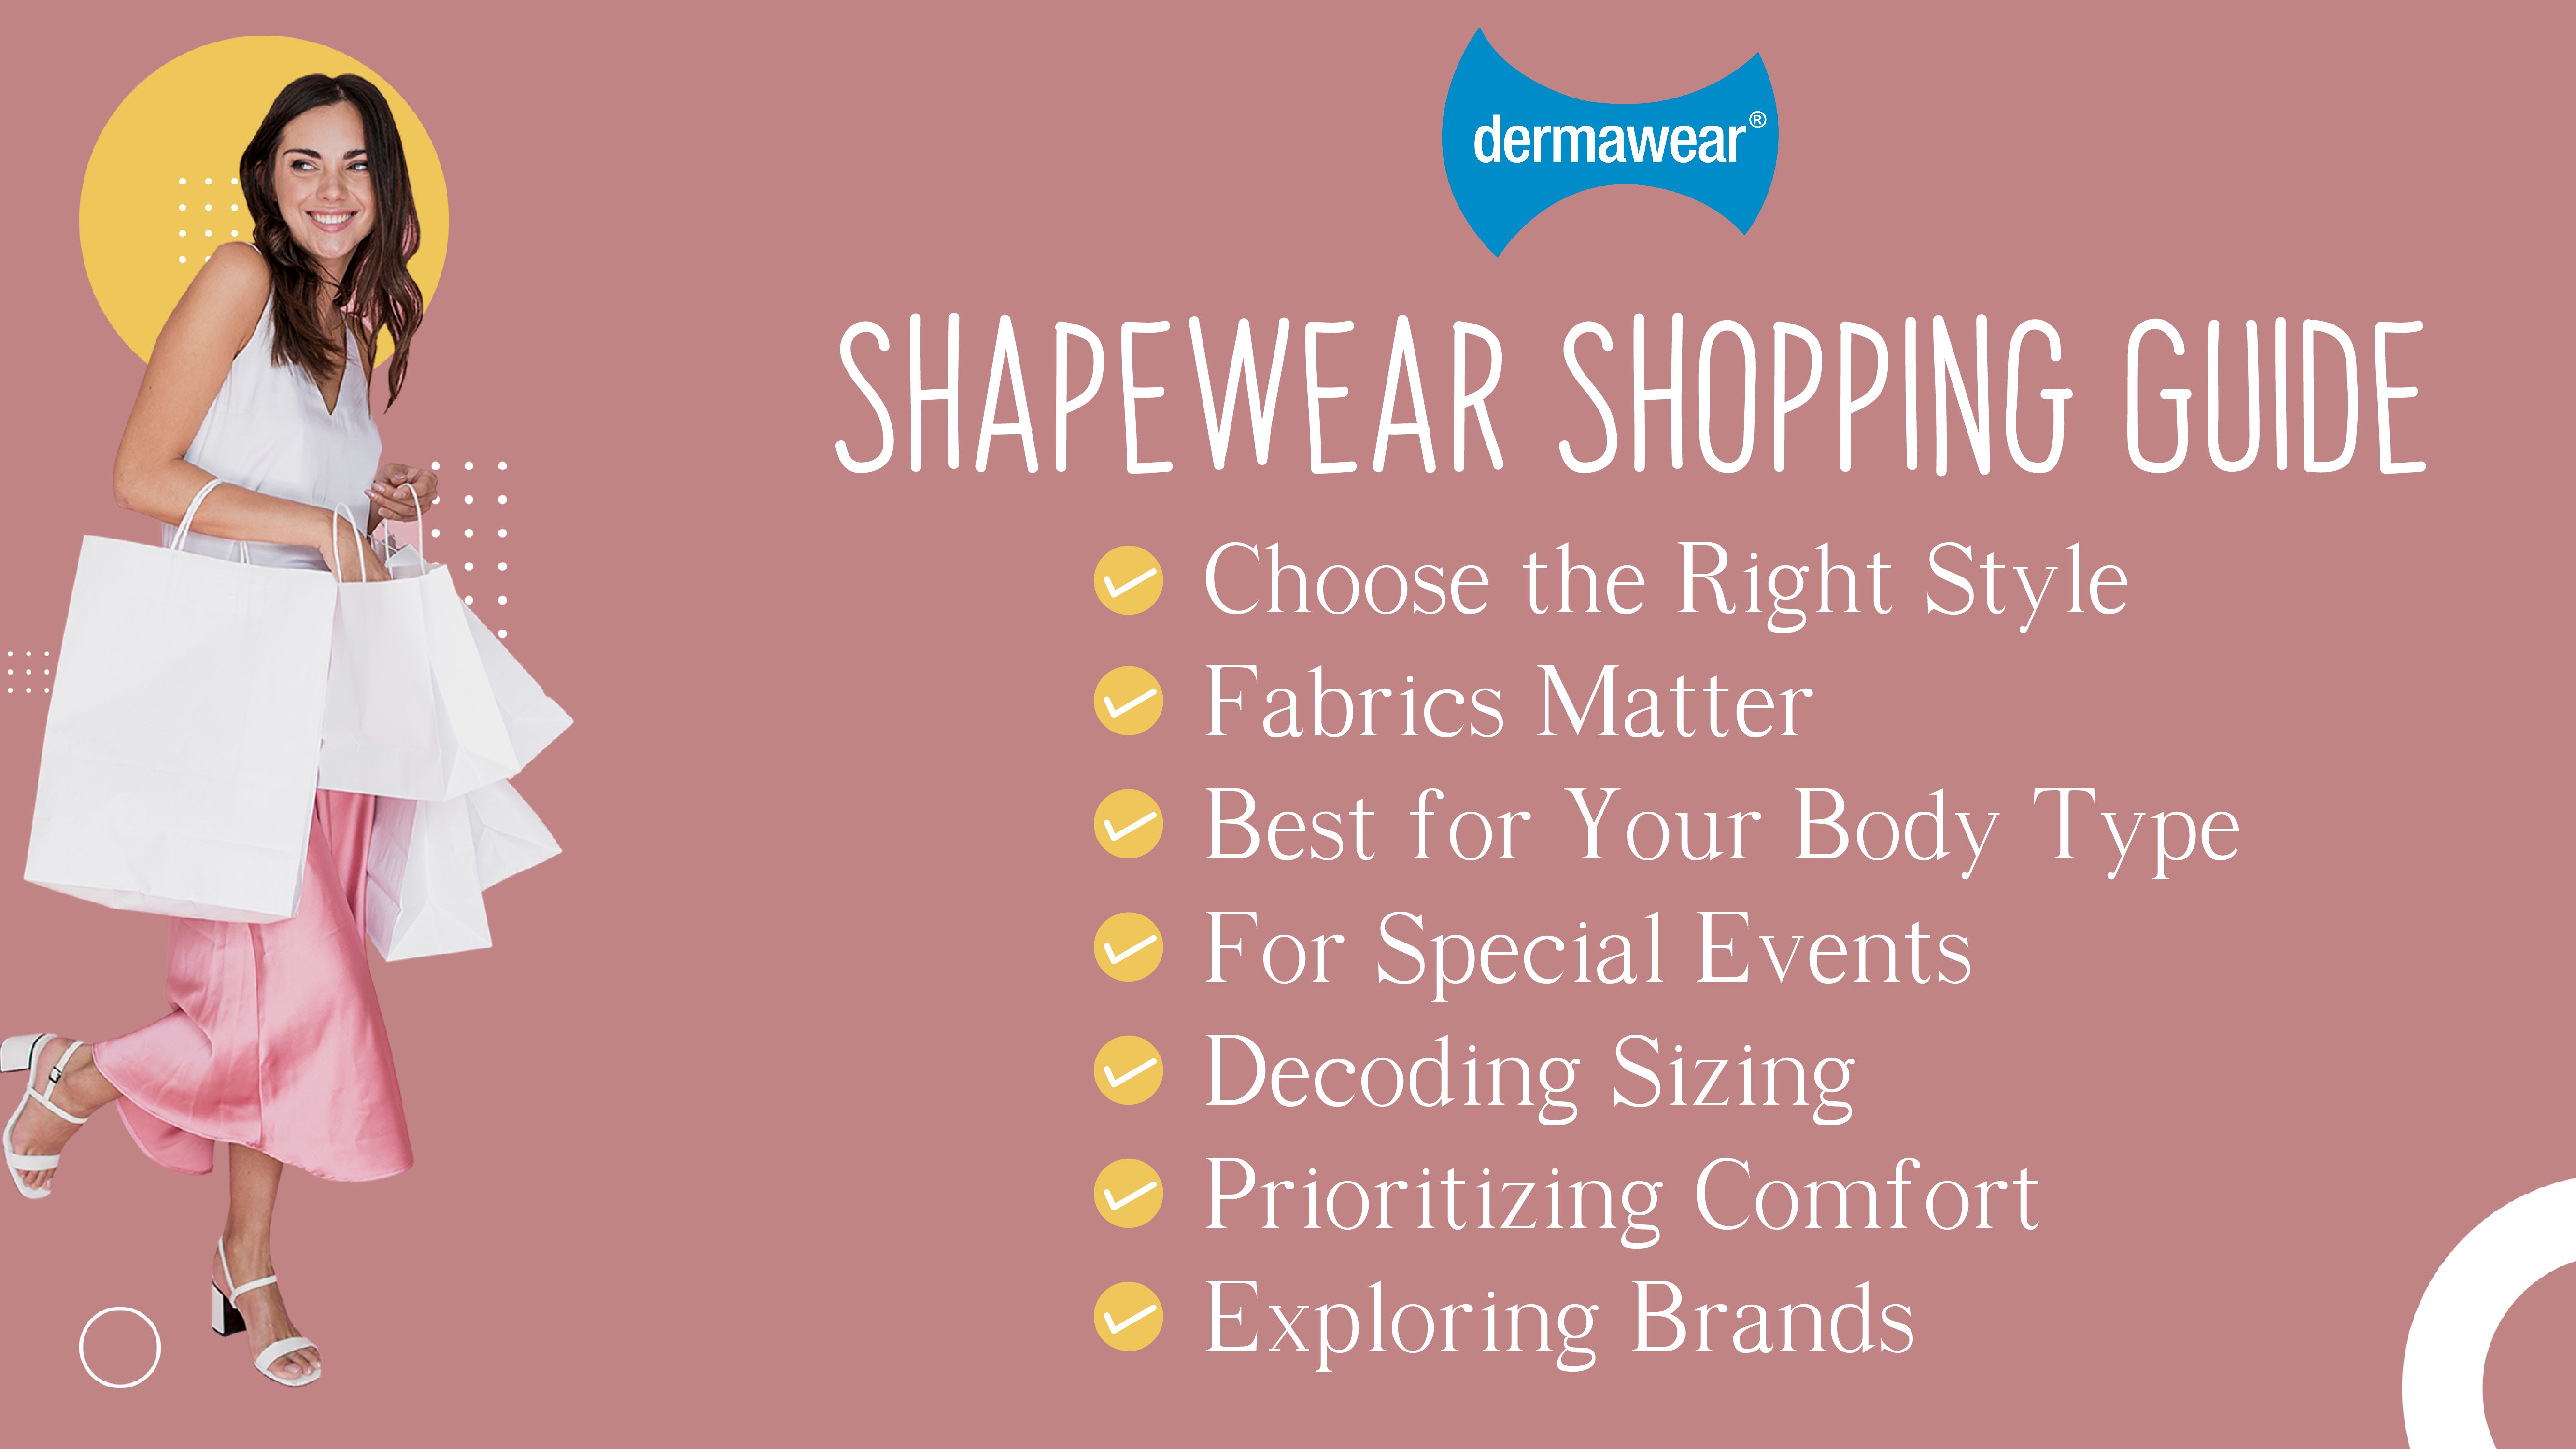 Dermawear Shapewear Is A Compression Garment Made Of Specially